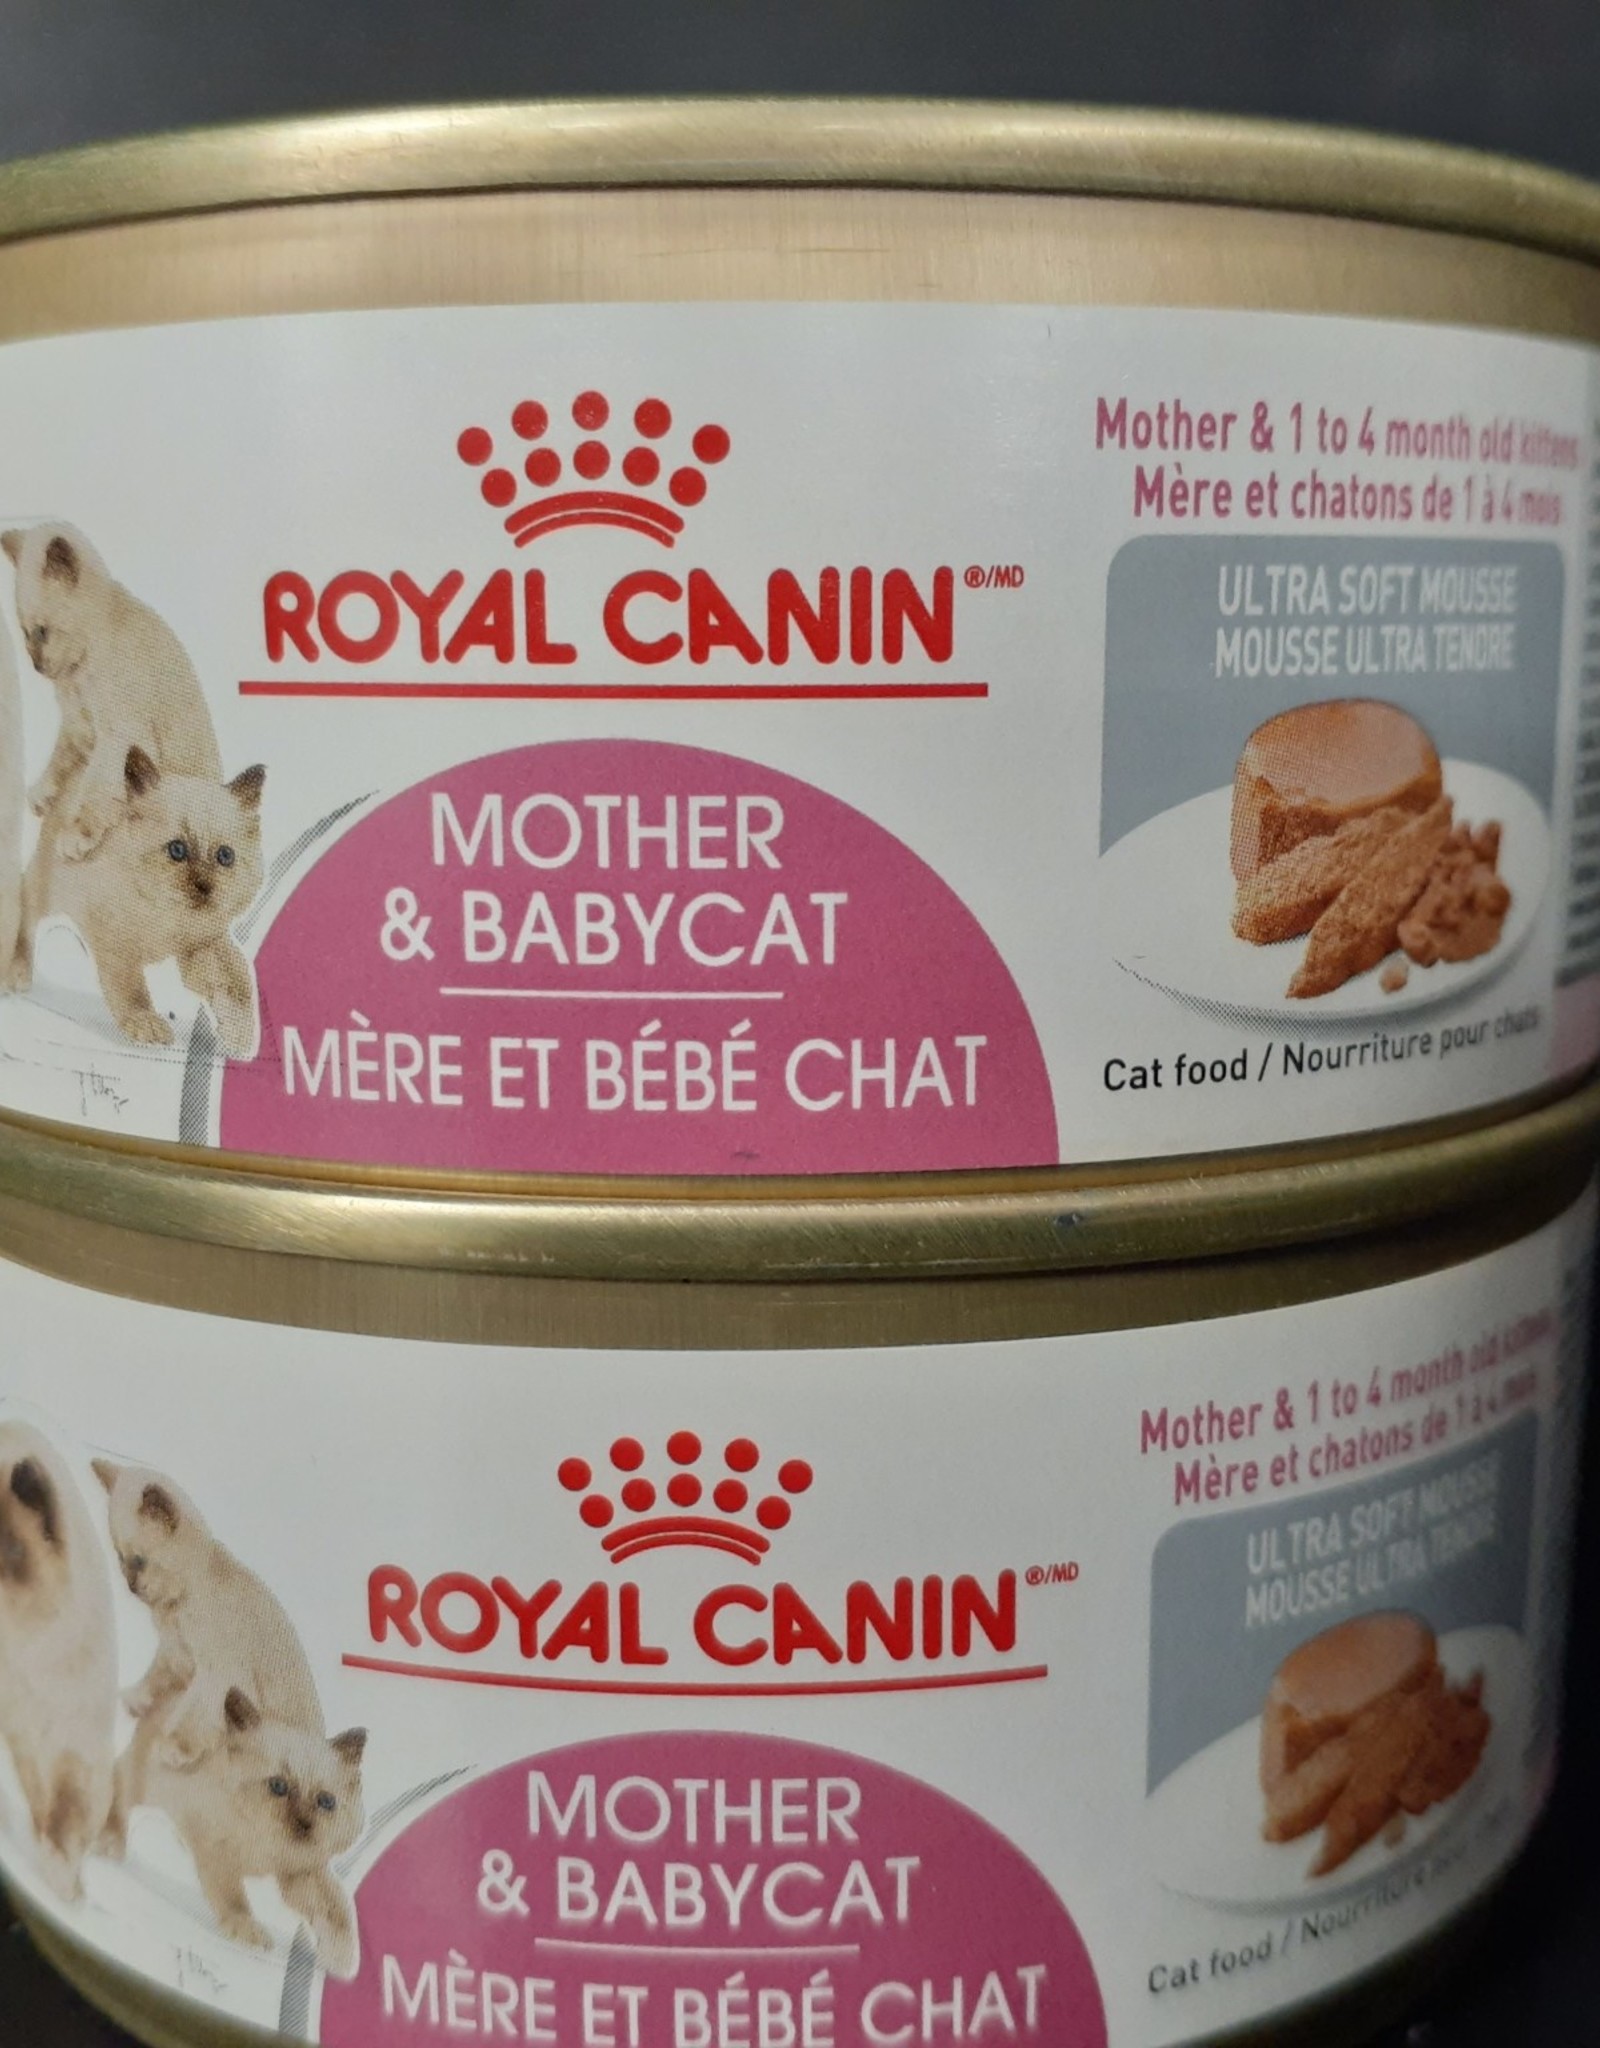 Royal Canin royal canin mother baby cat 5.1oz